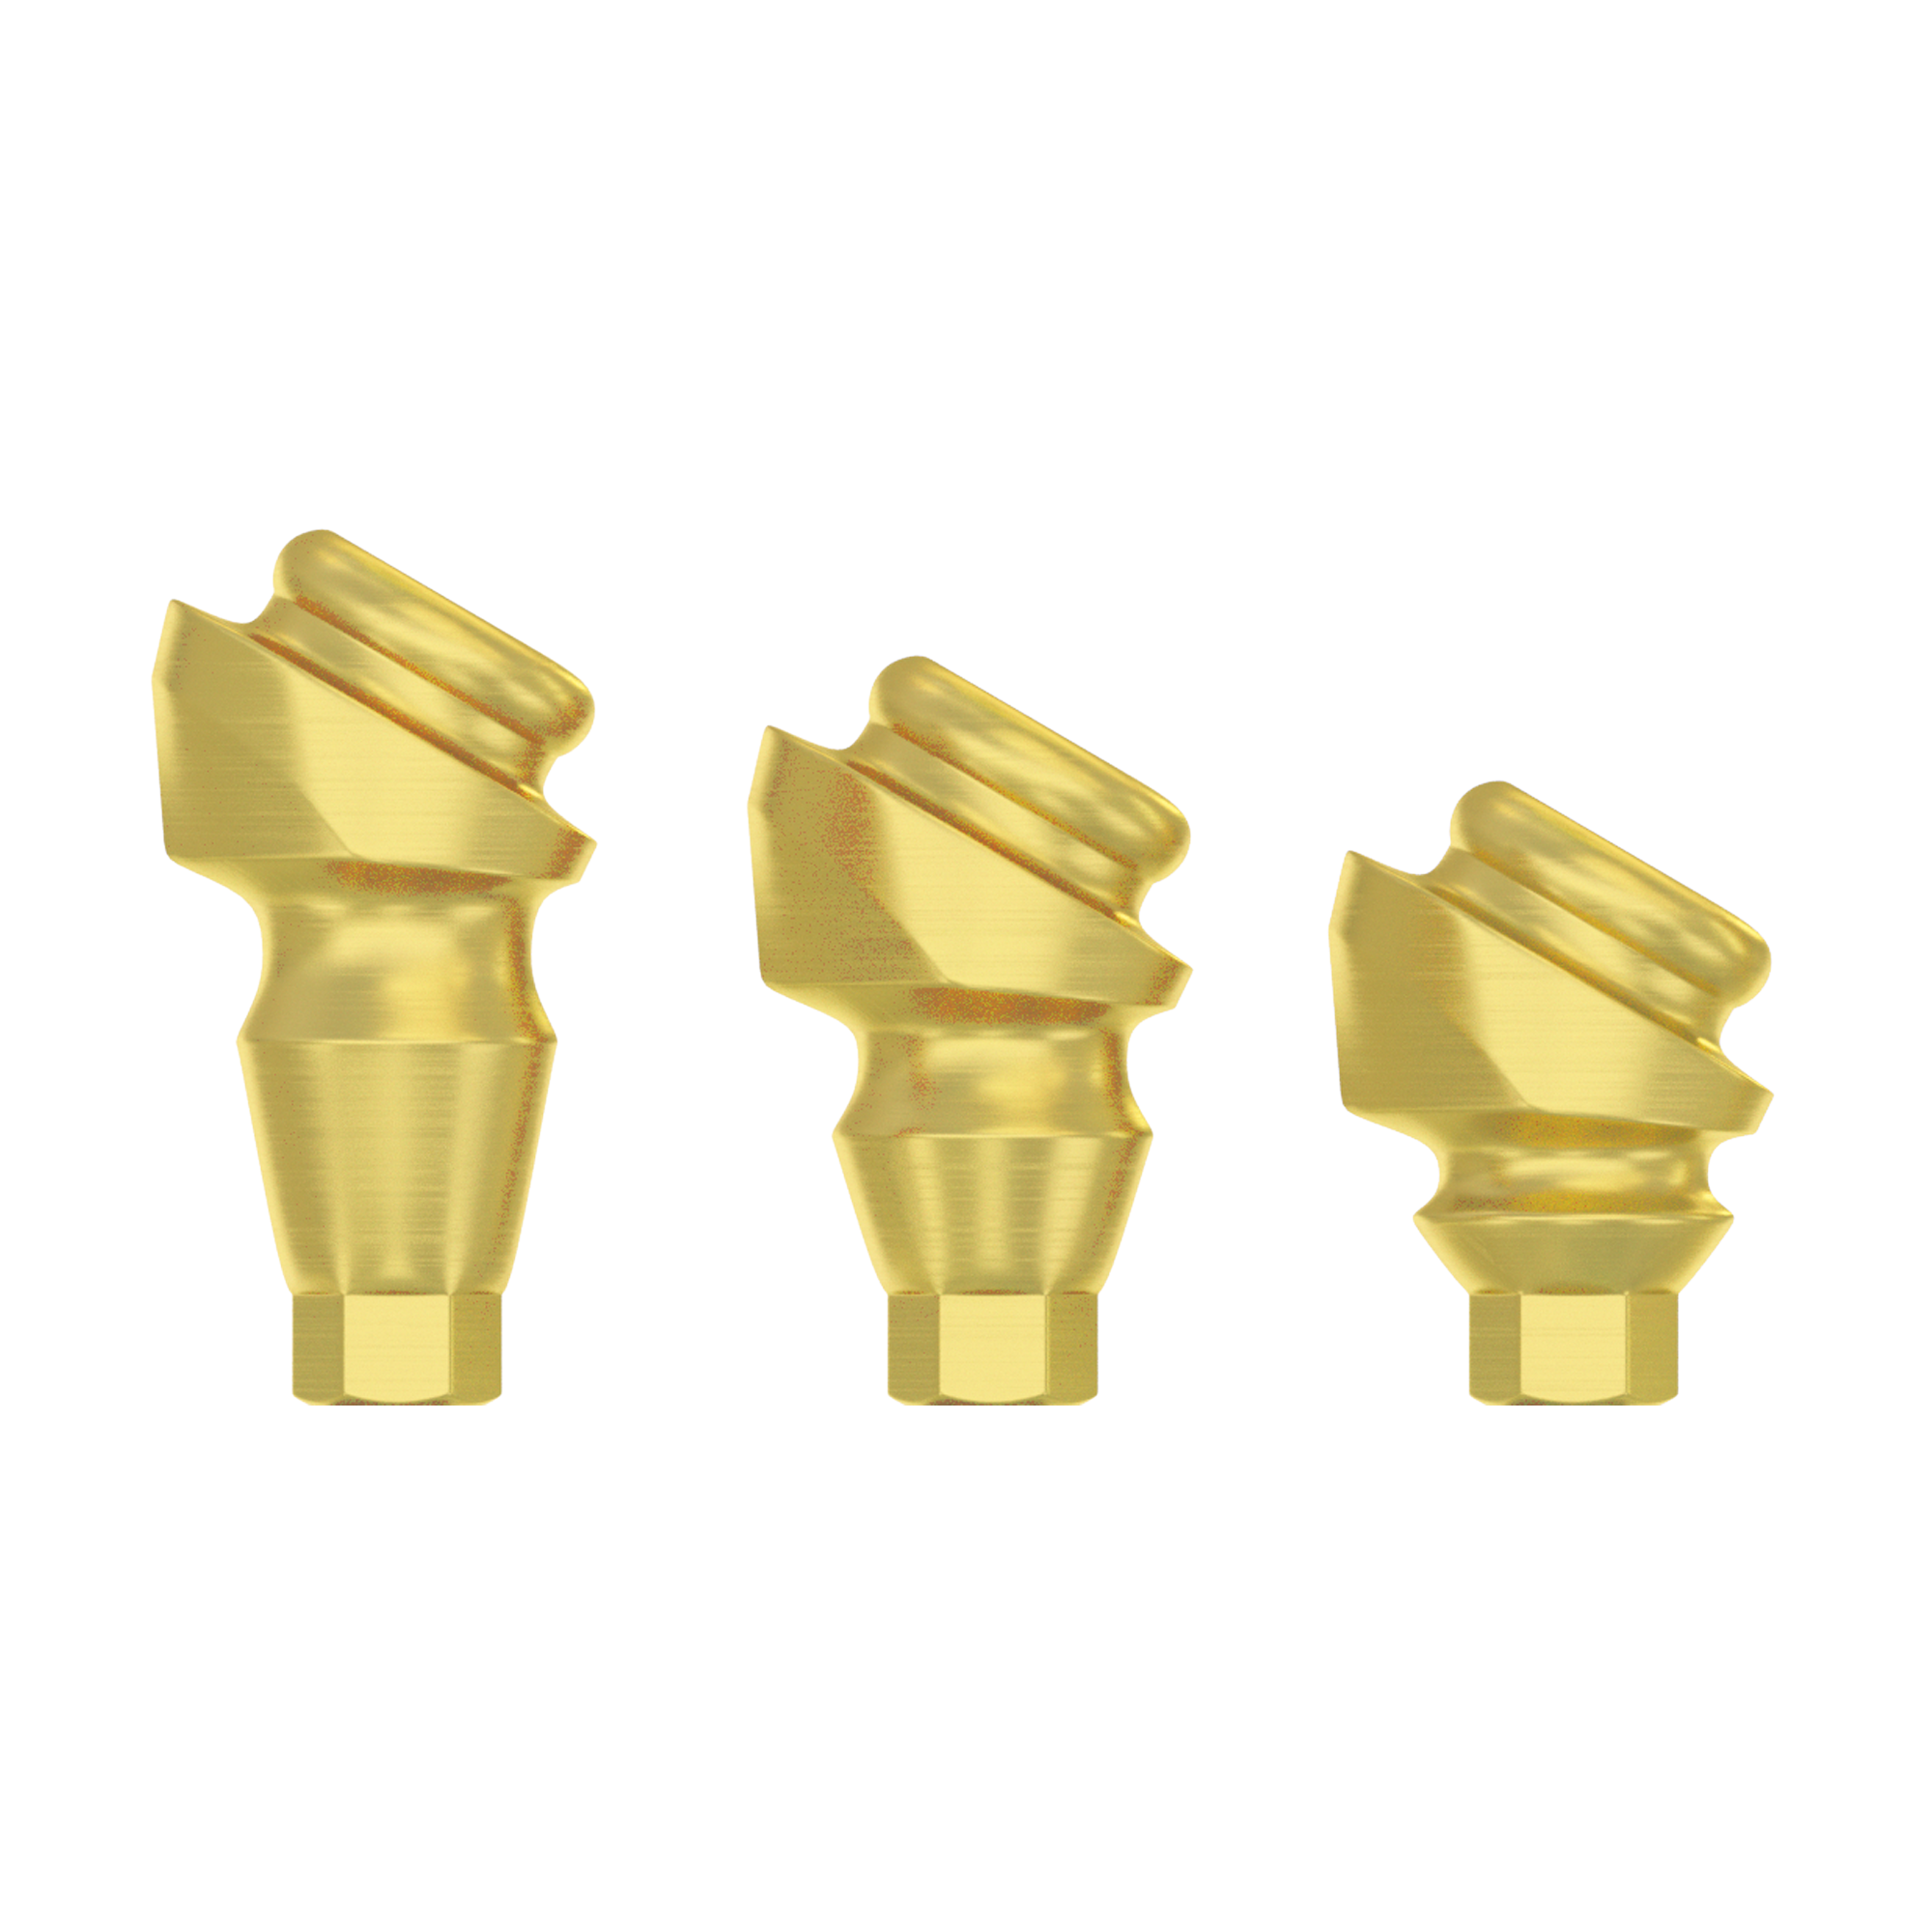 DSI Angulated Loc-in Abutment 5.0mm Full Set - Conical Connection NP Ø3.5mm